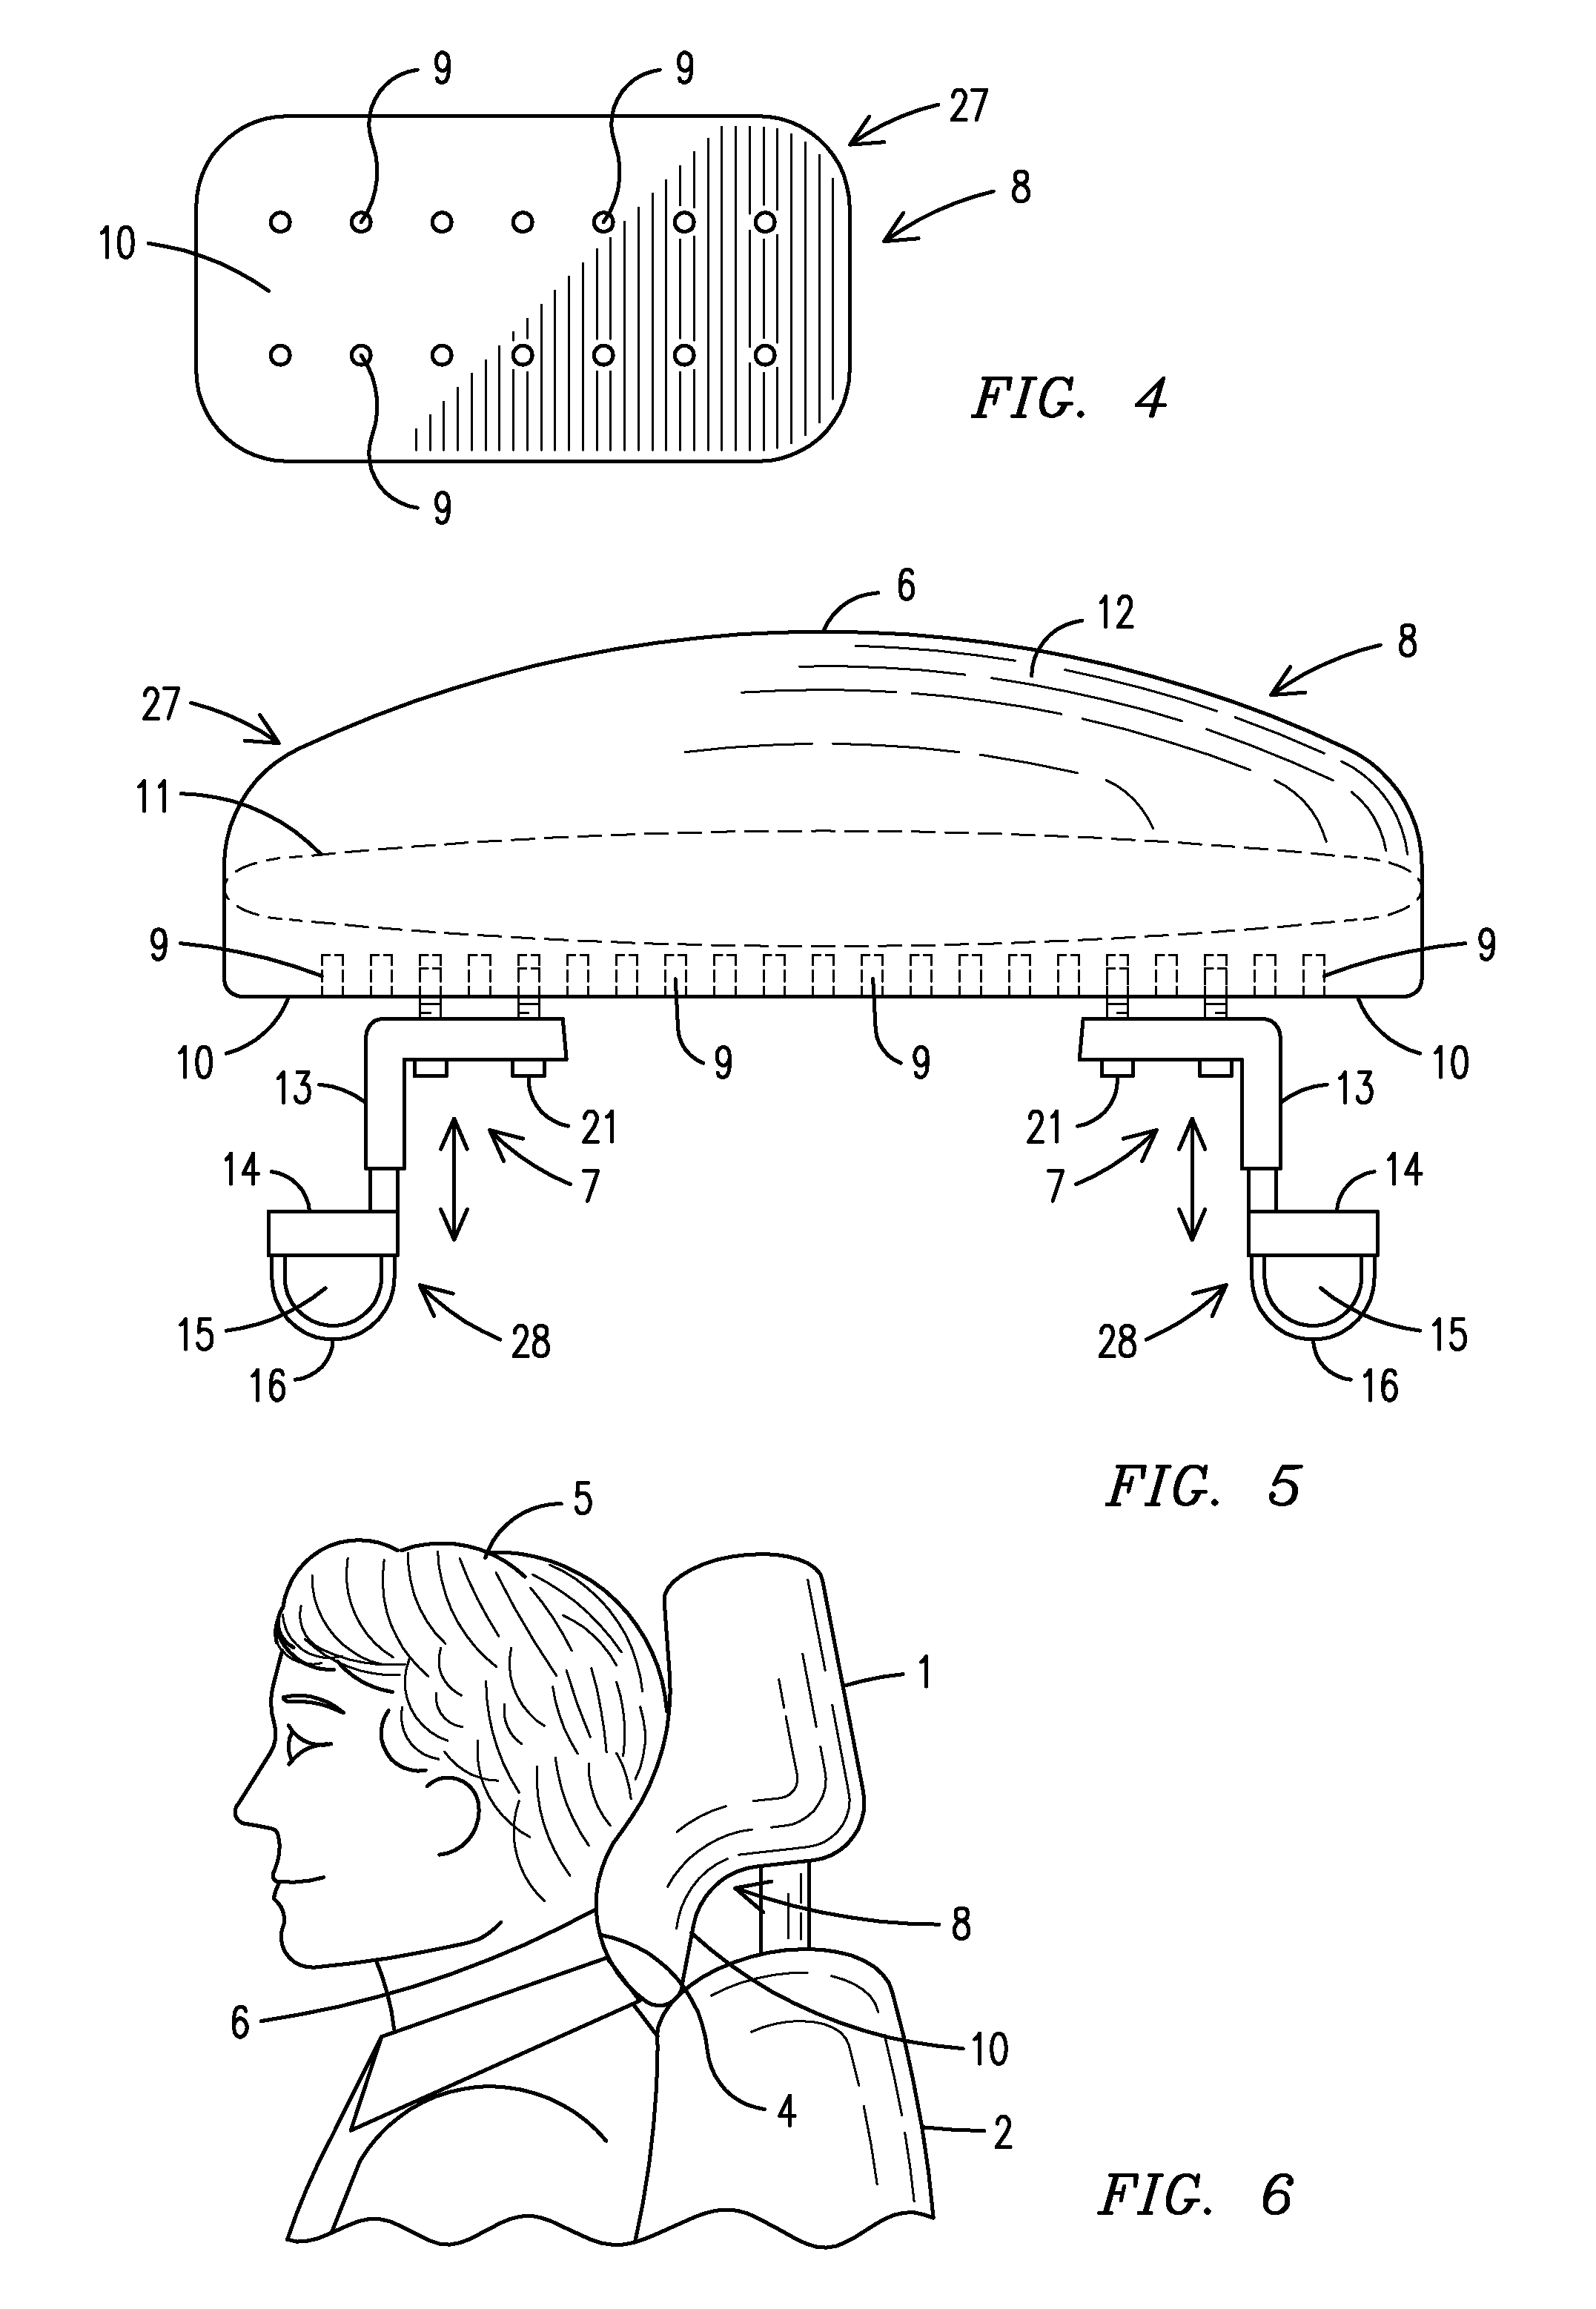 Vehicle seat neck protection device